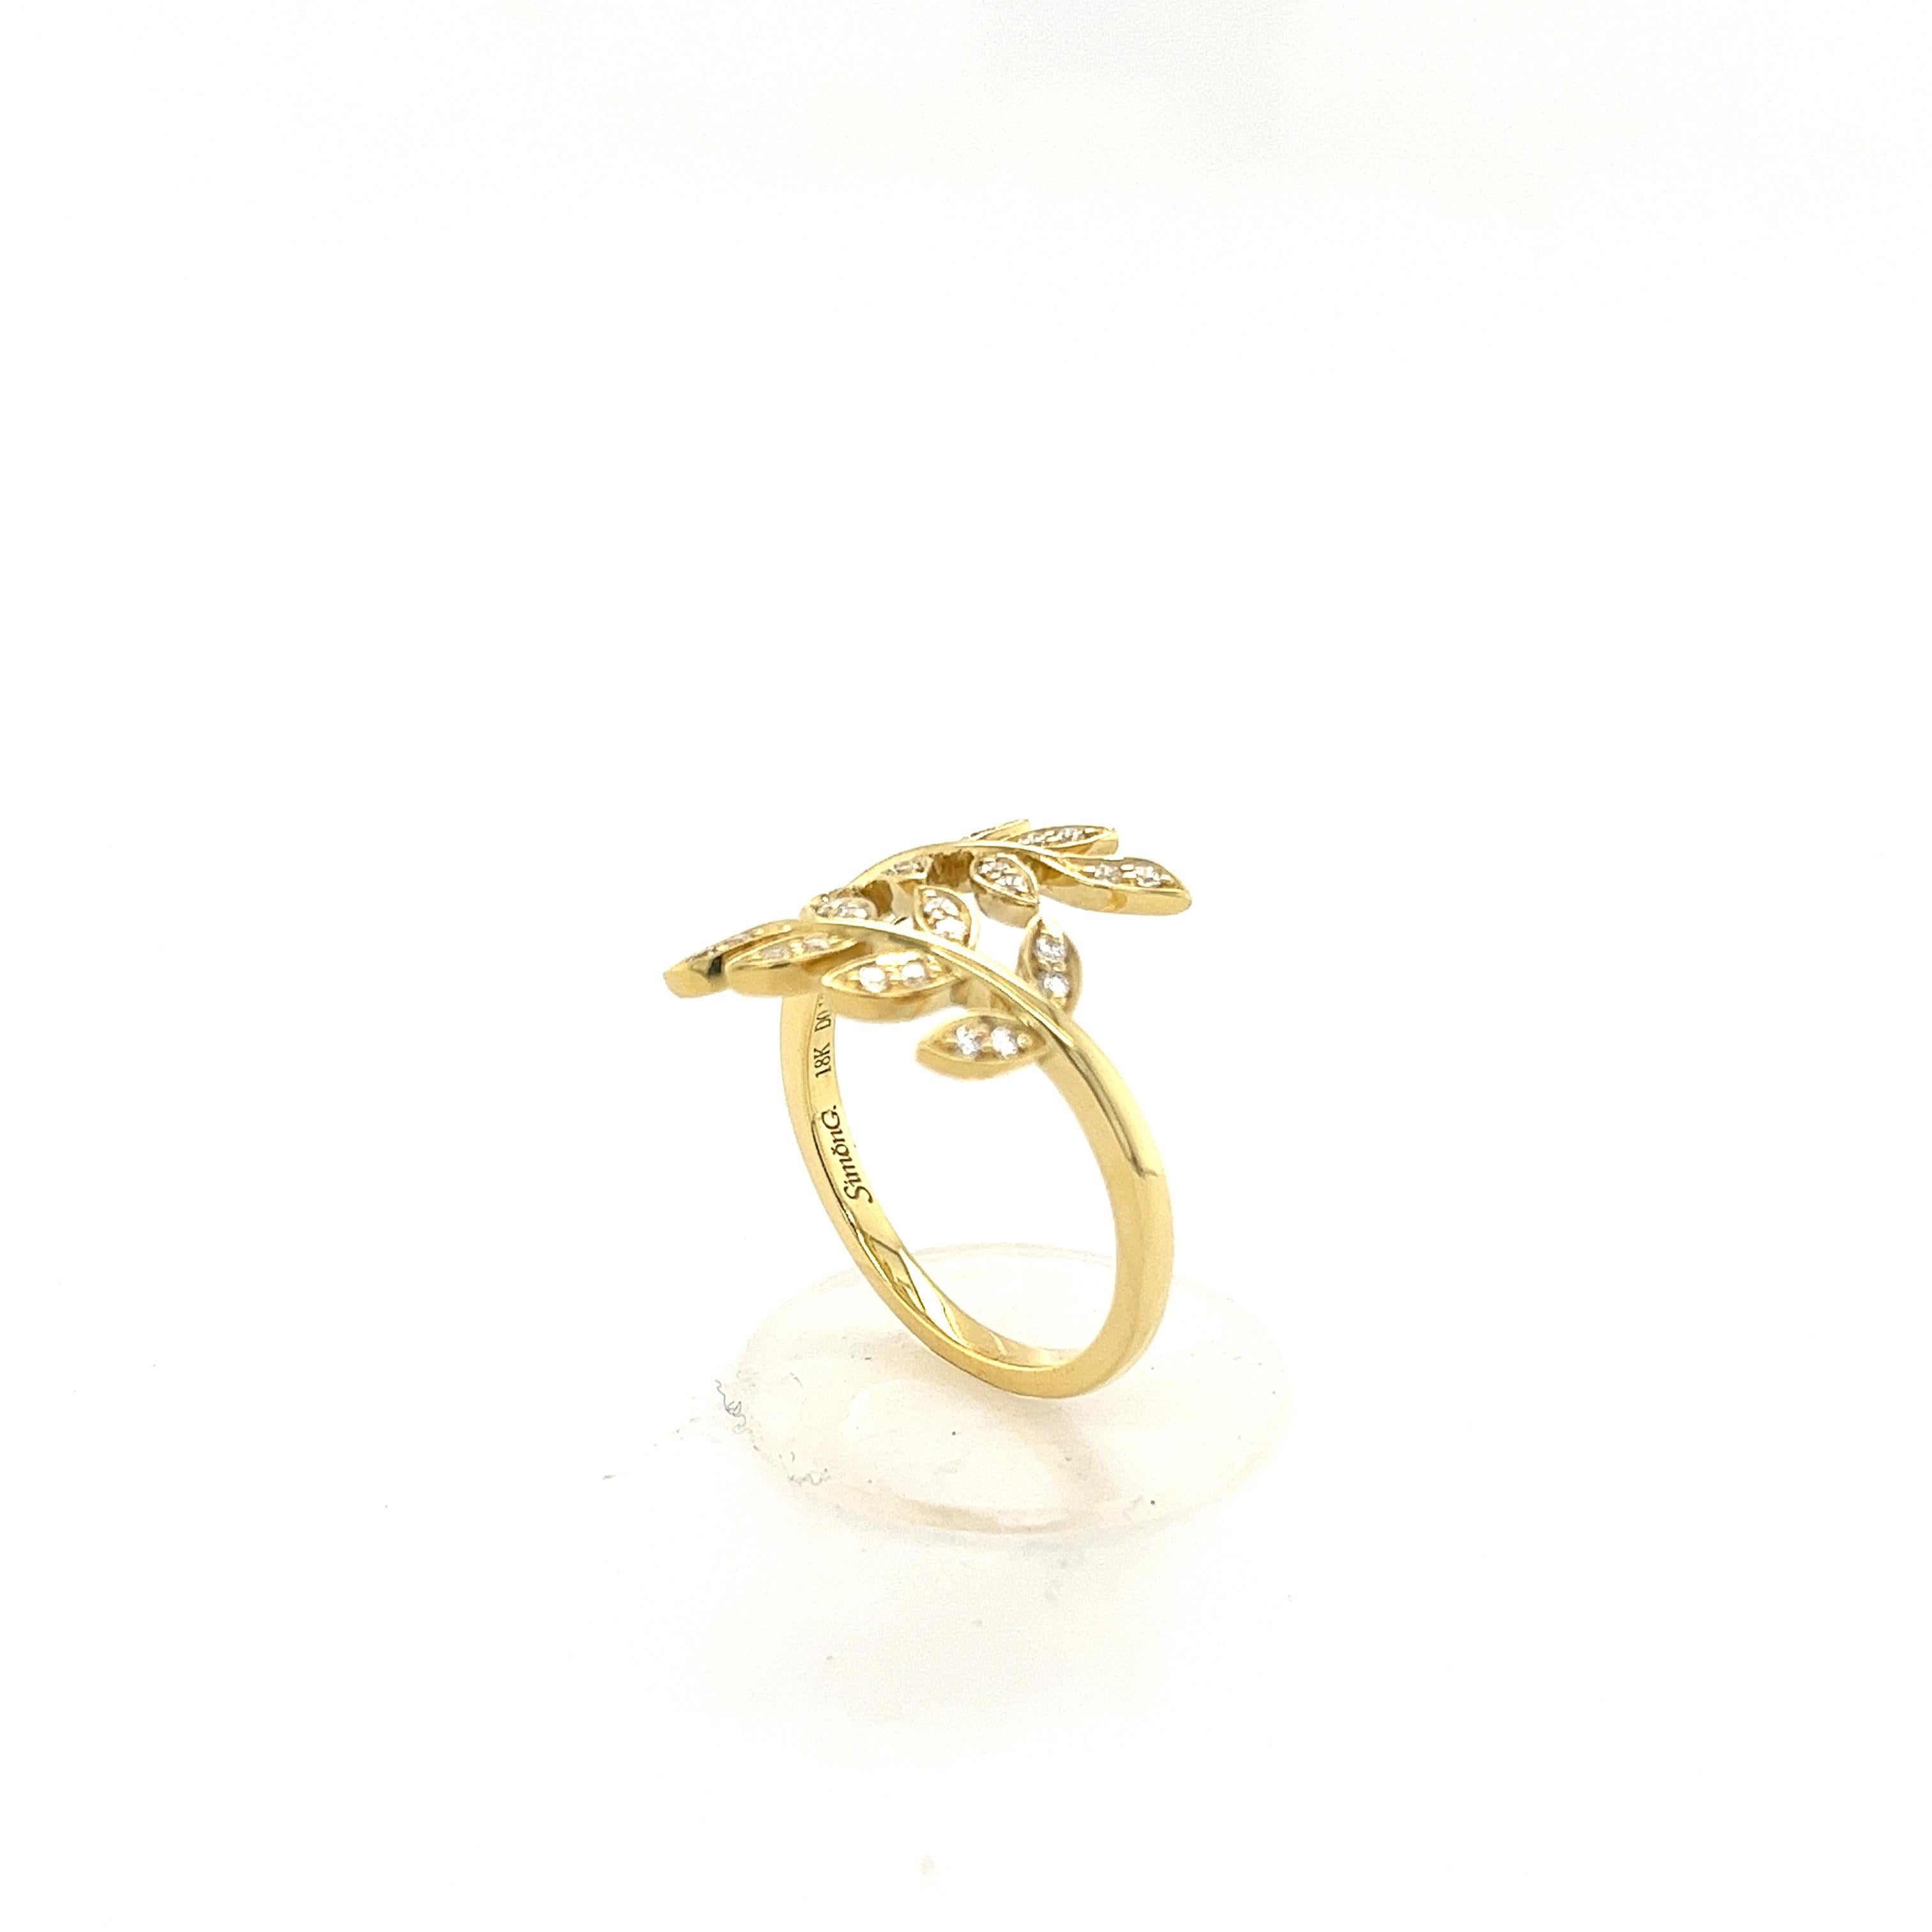 Simon G 18K Yellow Gold and Diamonds Open Style Ring Inspired by Nature For Sale 7